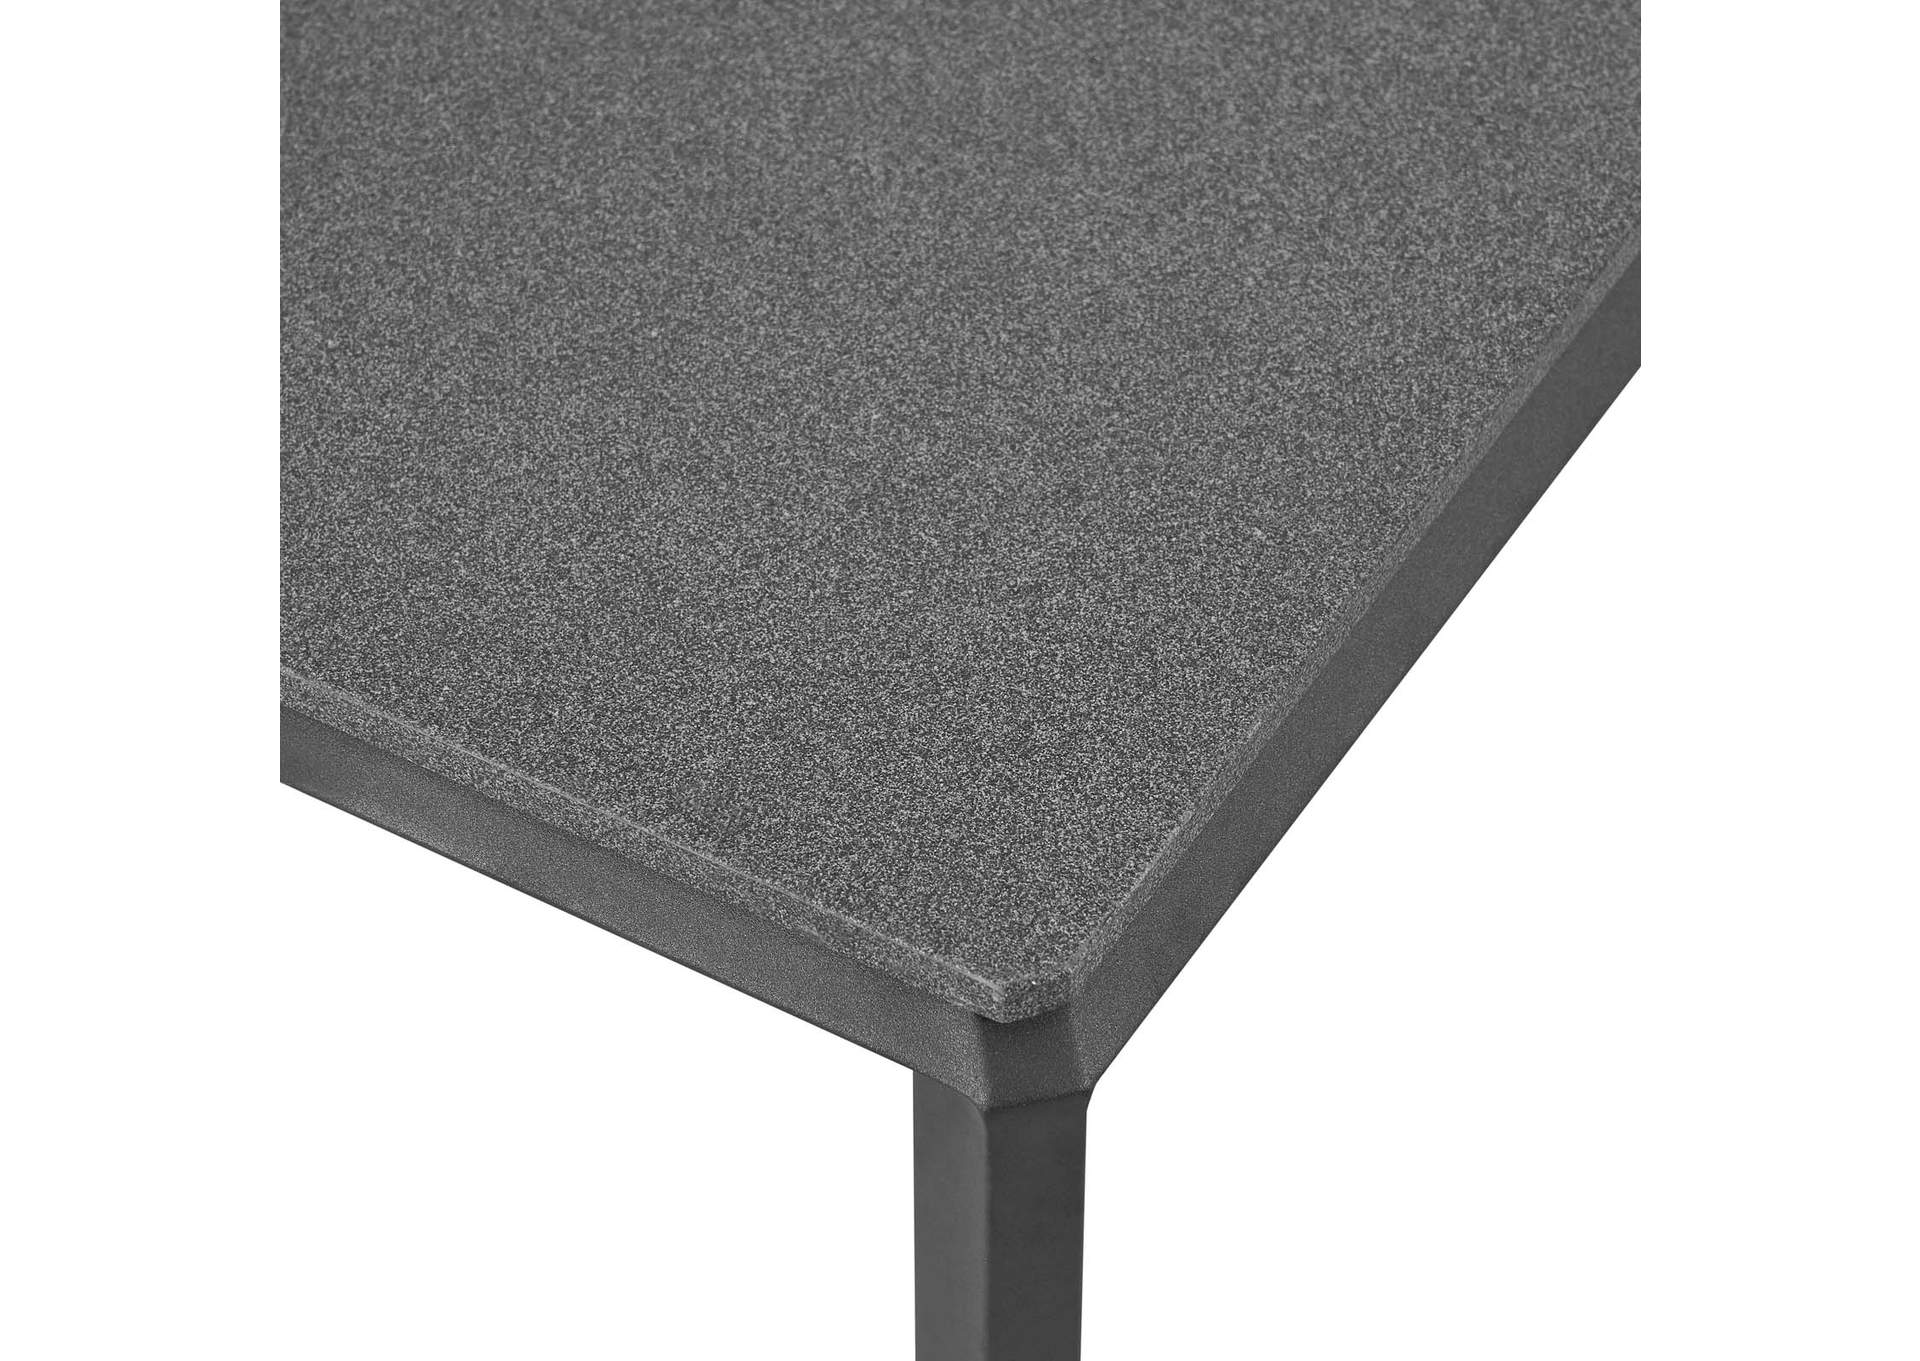 Gray Riverside Aluminum Outdoor Patio Coffee Table,Modway